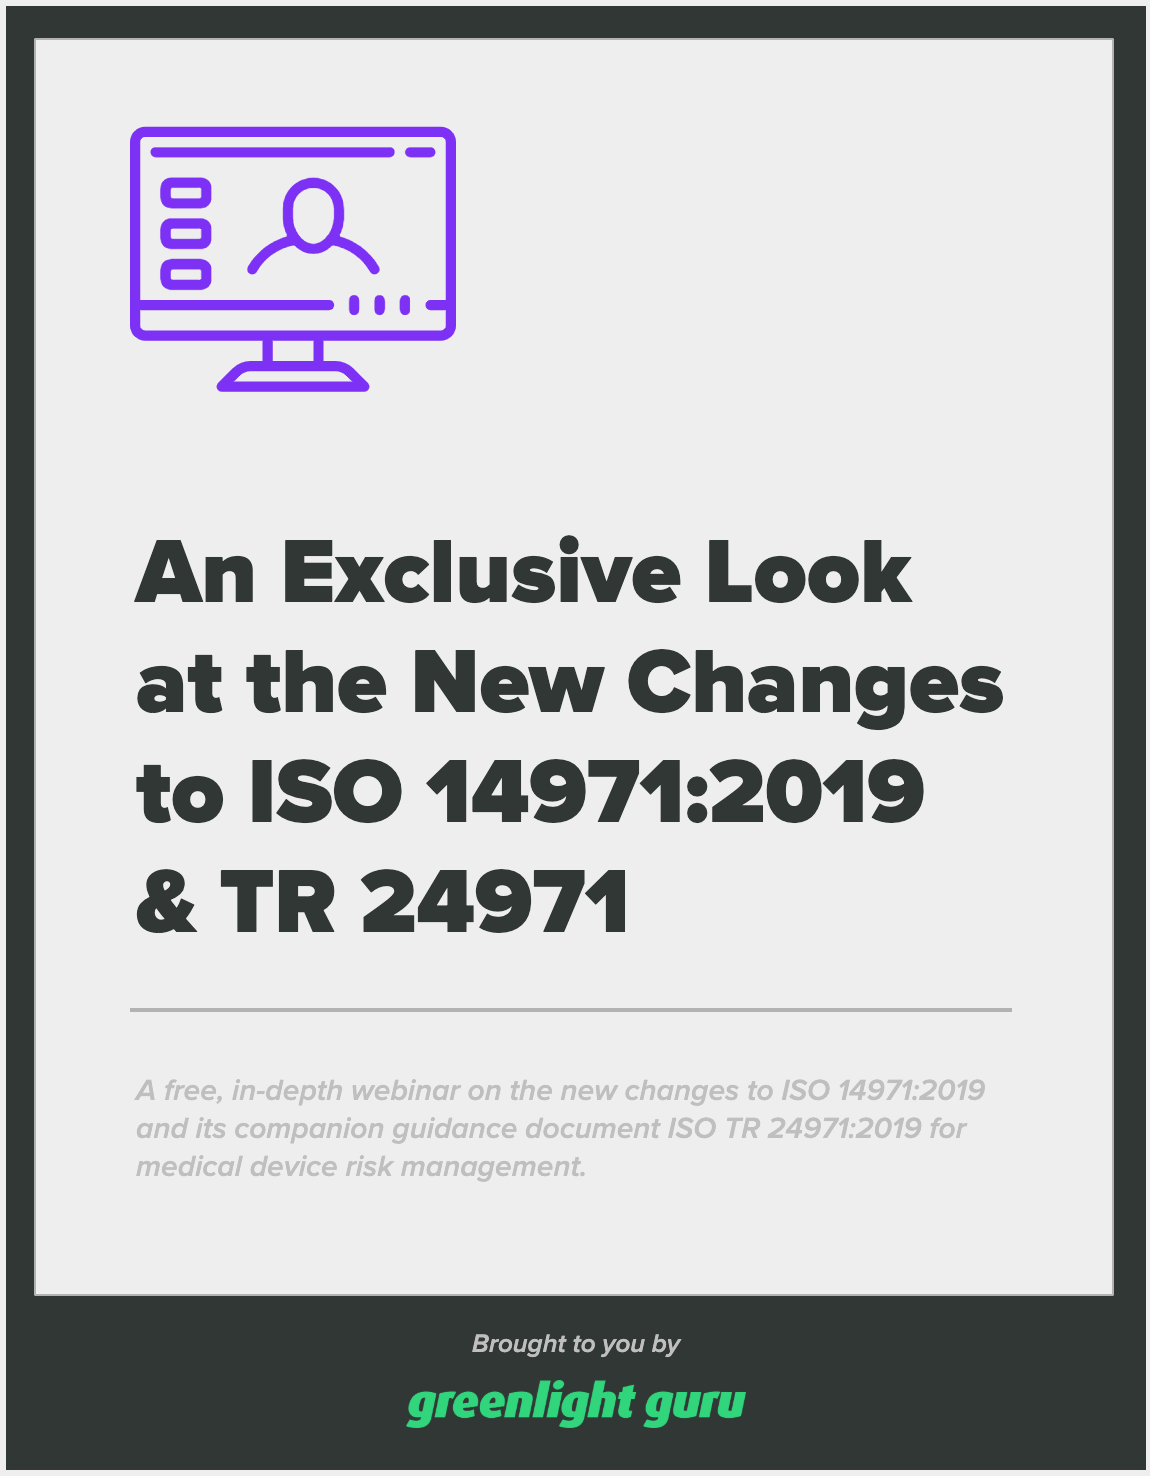 What are the Changes to ISO 14971:2019 & TR 24971?